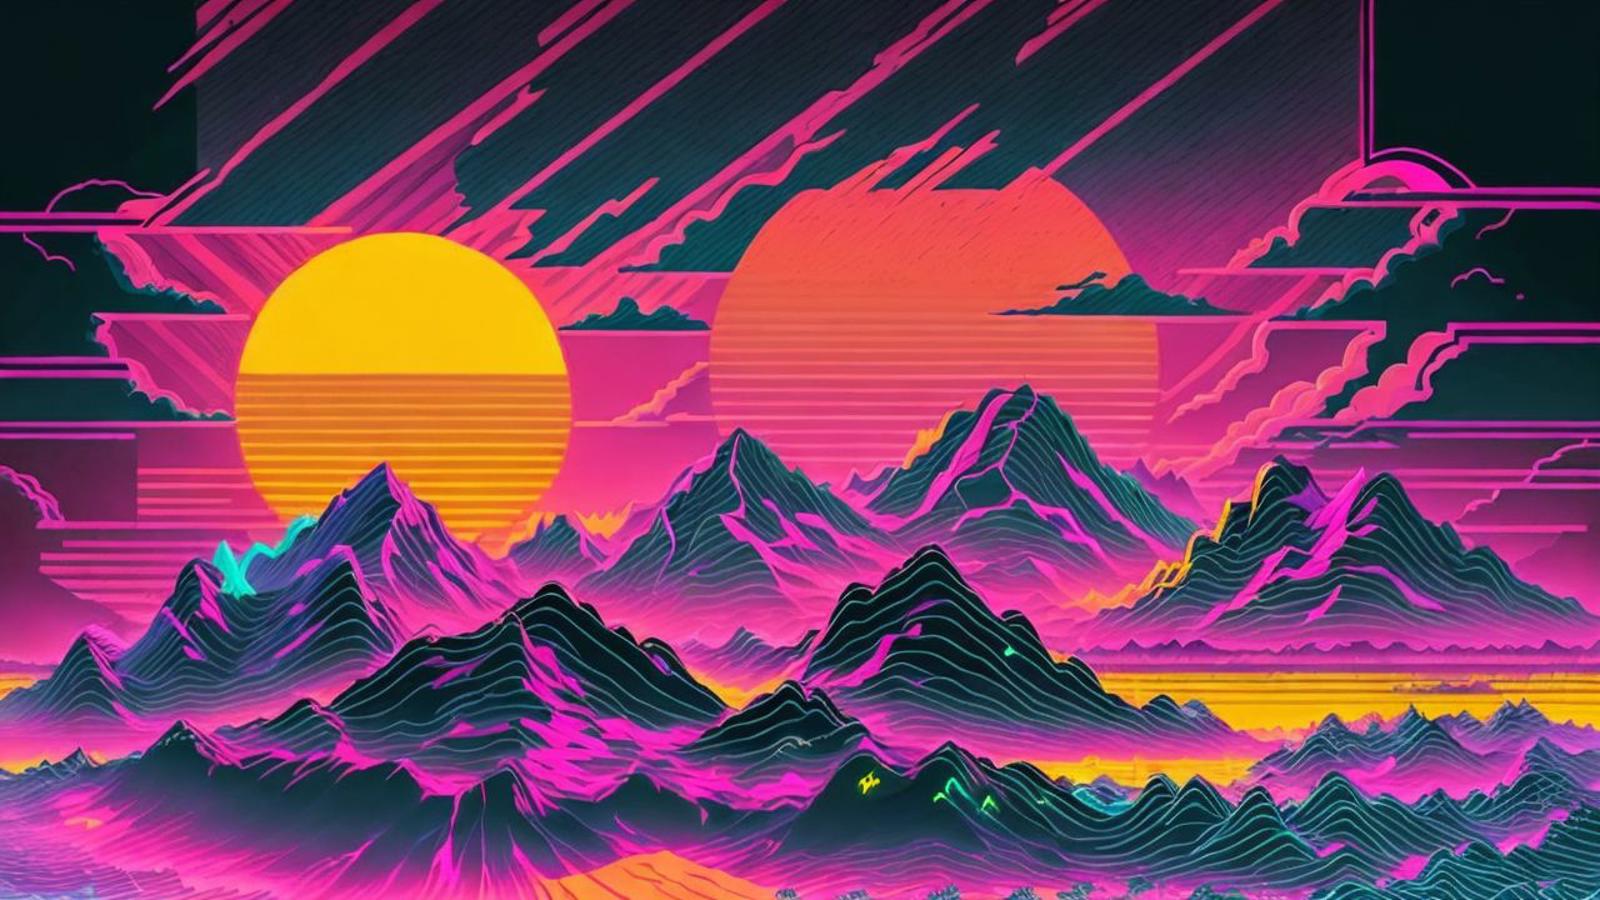 Retrowave image by marusame